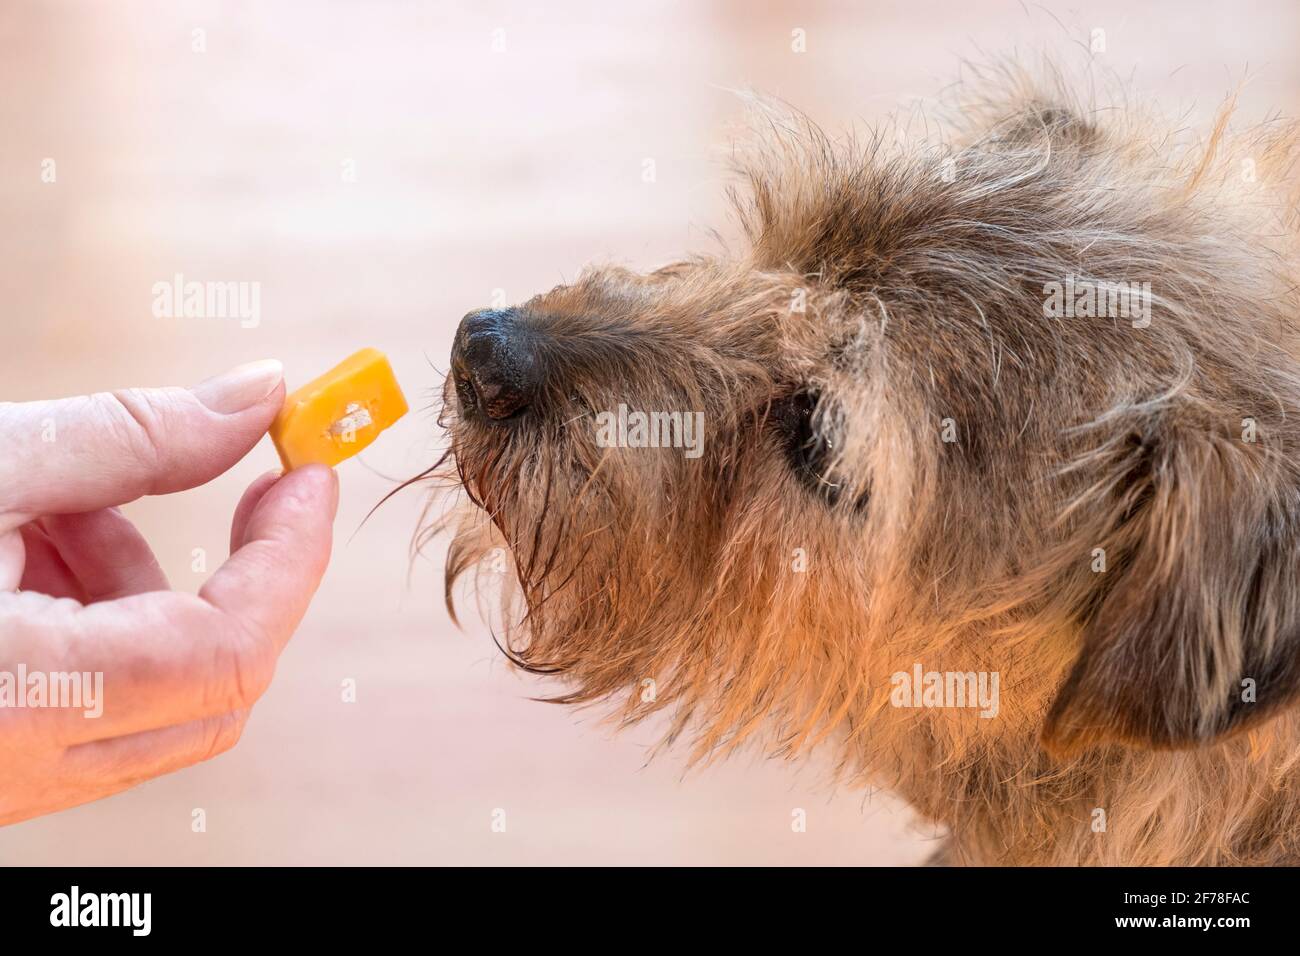 Pet medication. Giving a dog an antibiotic pill / tablet hidden in a piece of cheese. Dog medication to treat a giardia infection. Stock Photo